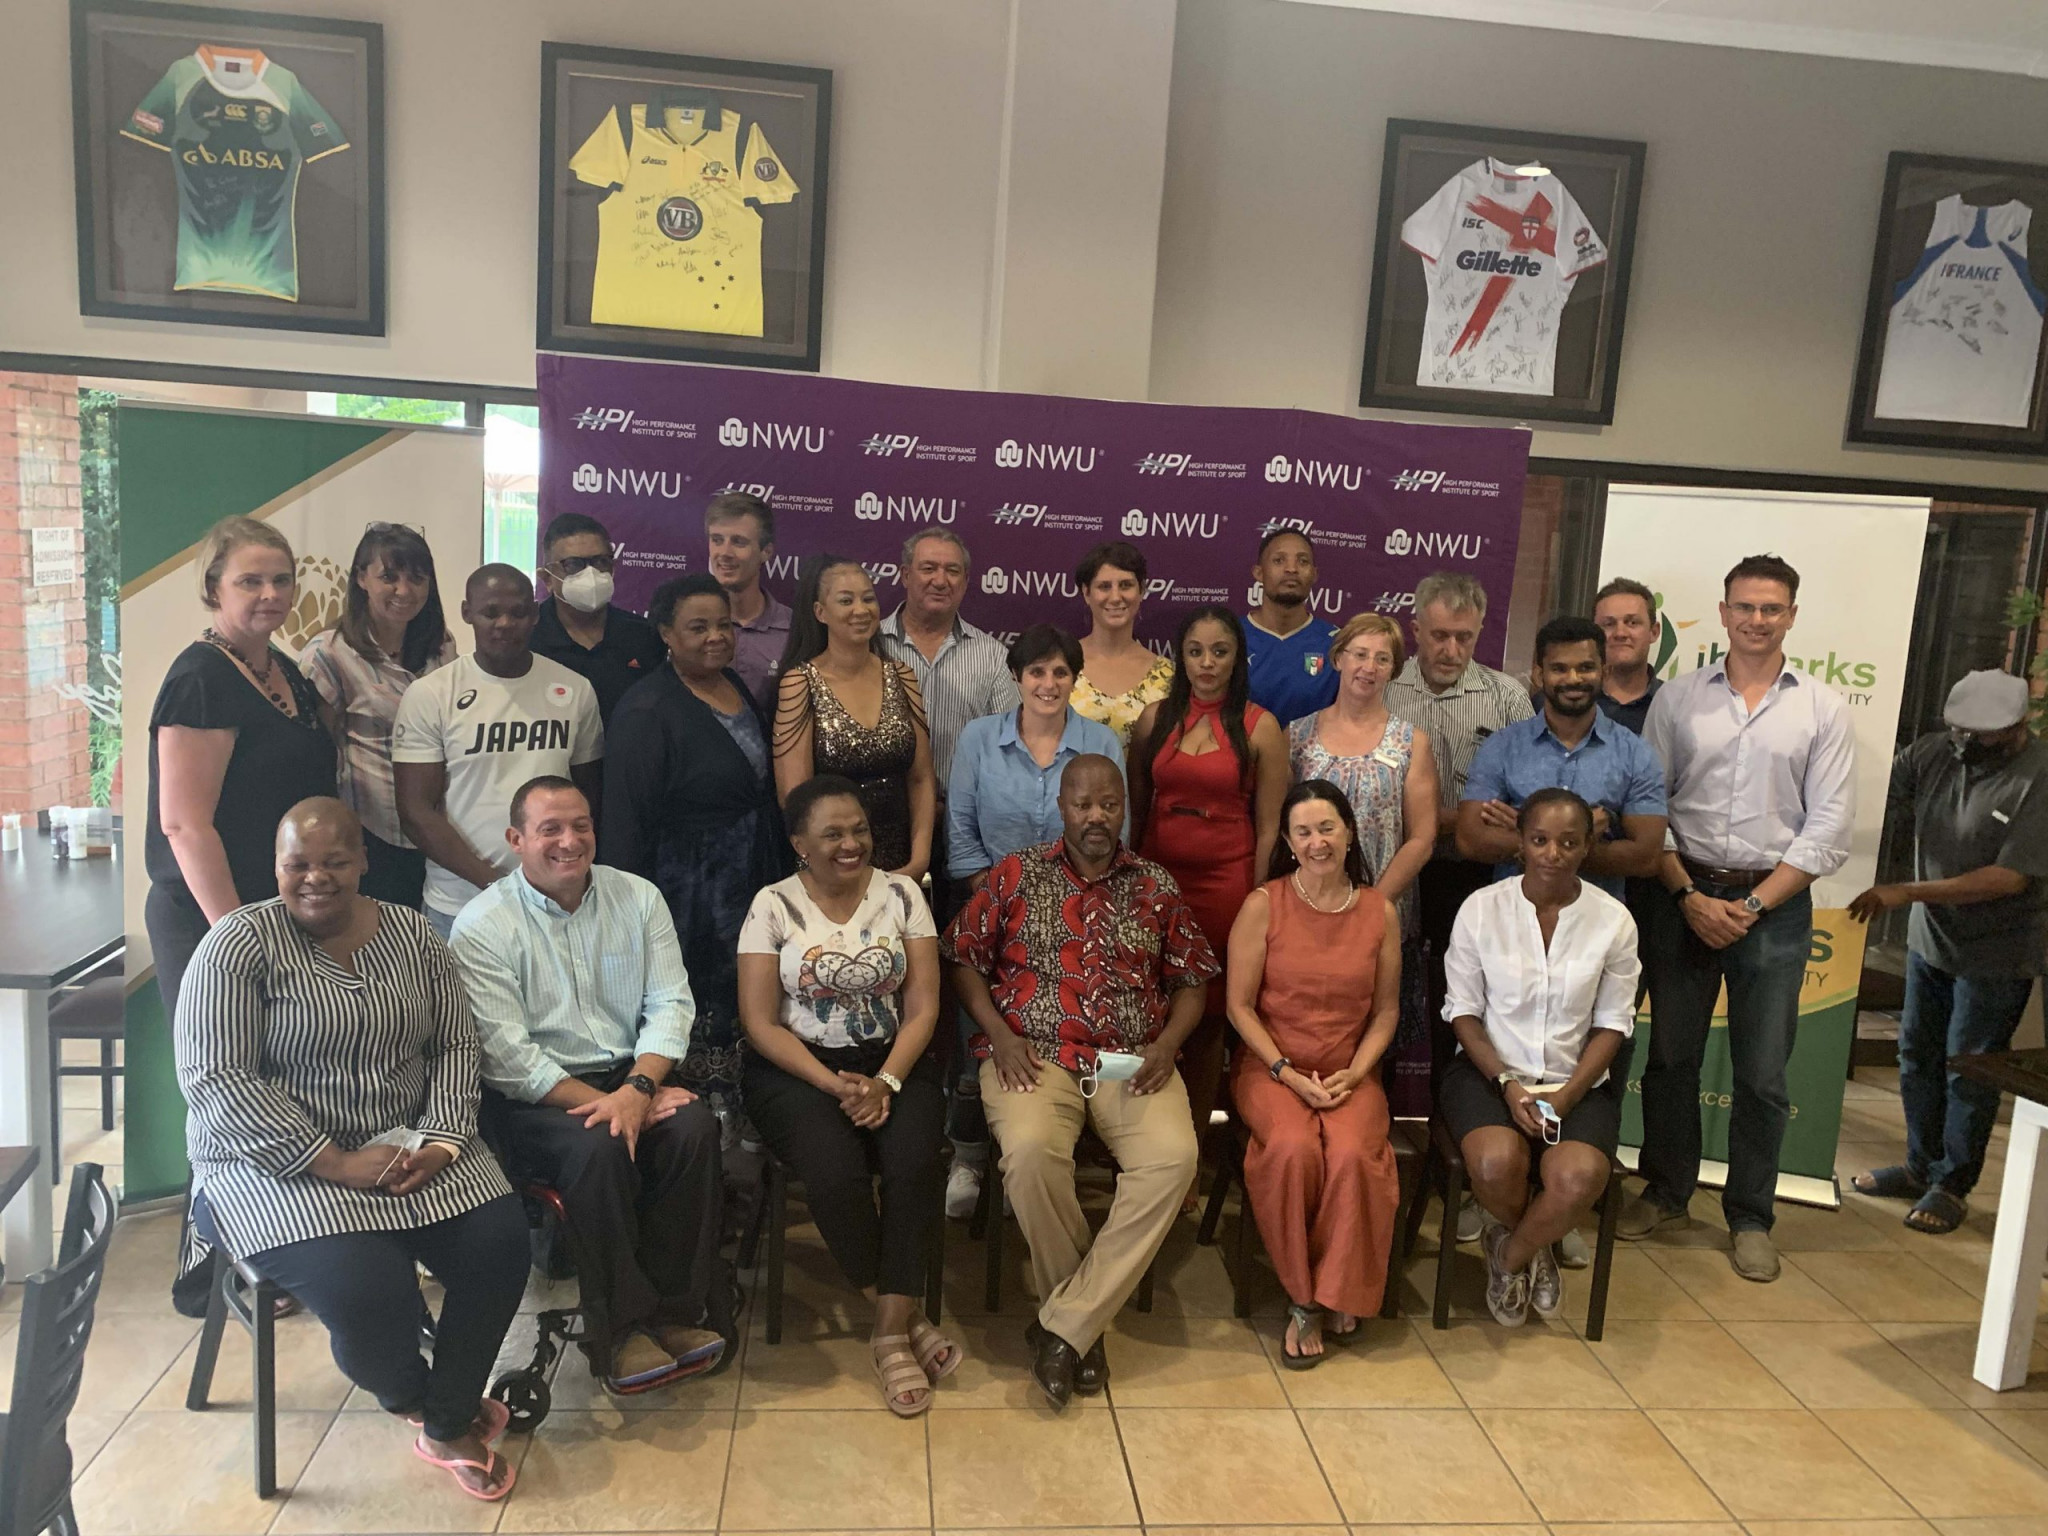 SASCOC holds high-performance conference to plan future of South African sport